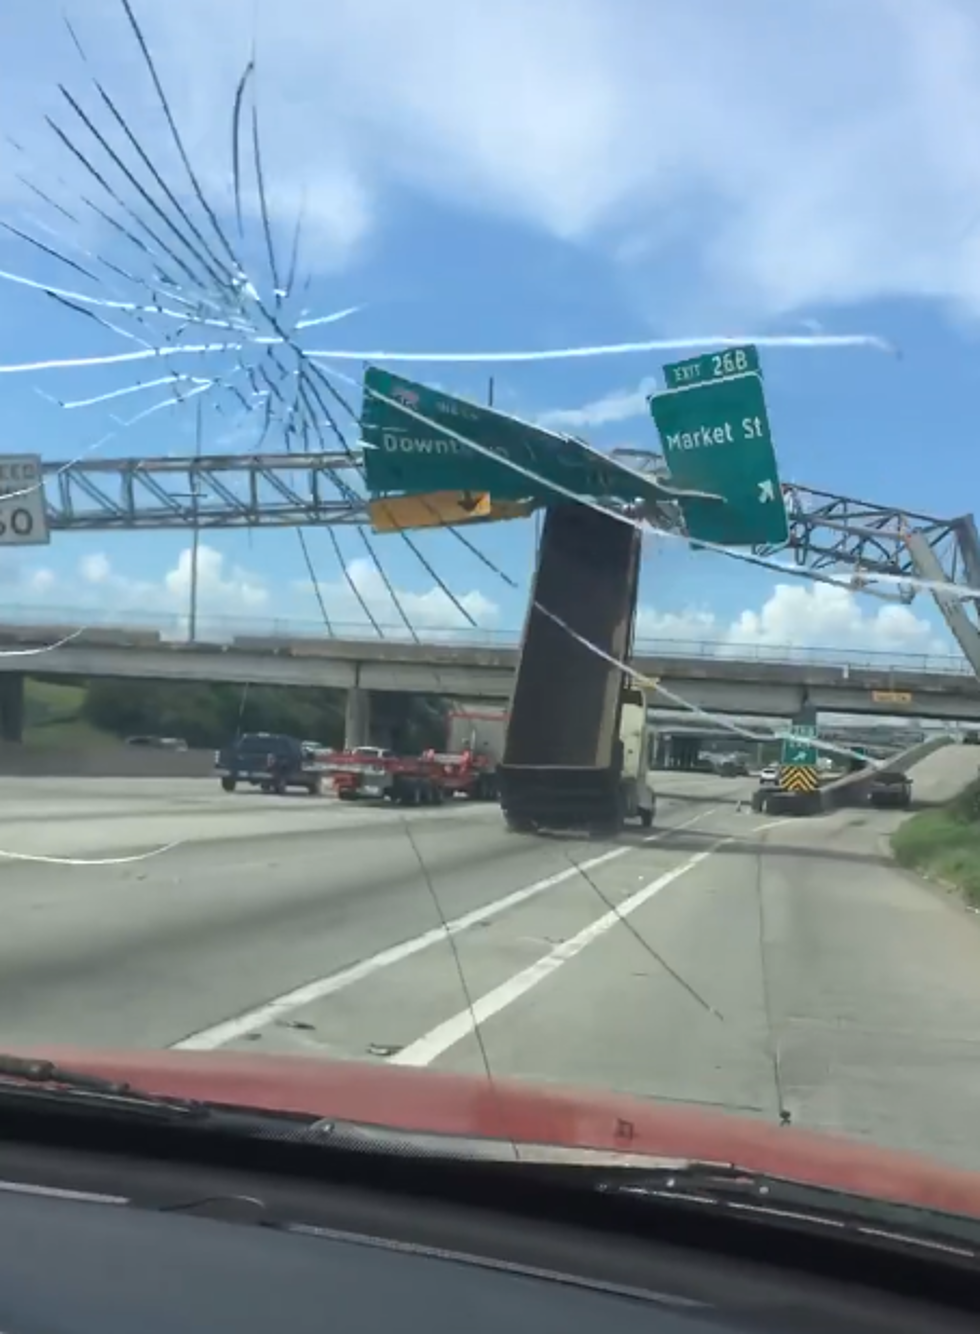 Texas Big Rig Completely Demolishes Highway Sign in Horrific Accident [VIDEO]